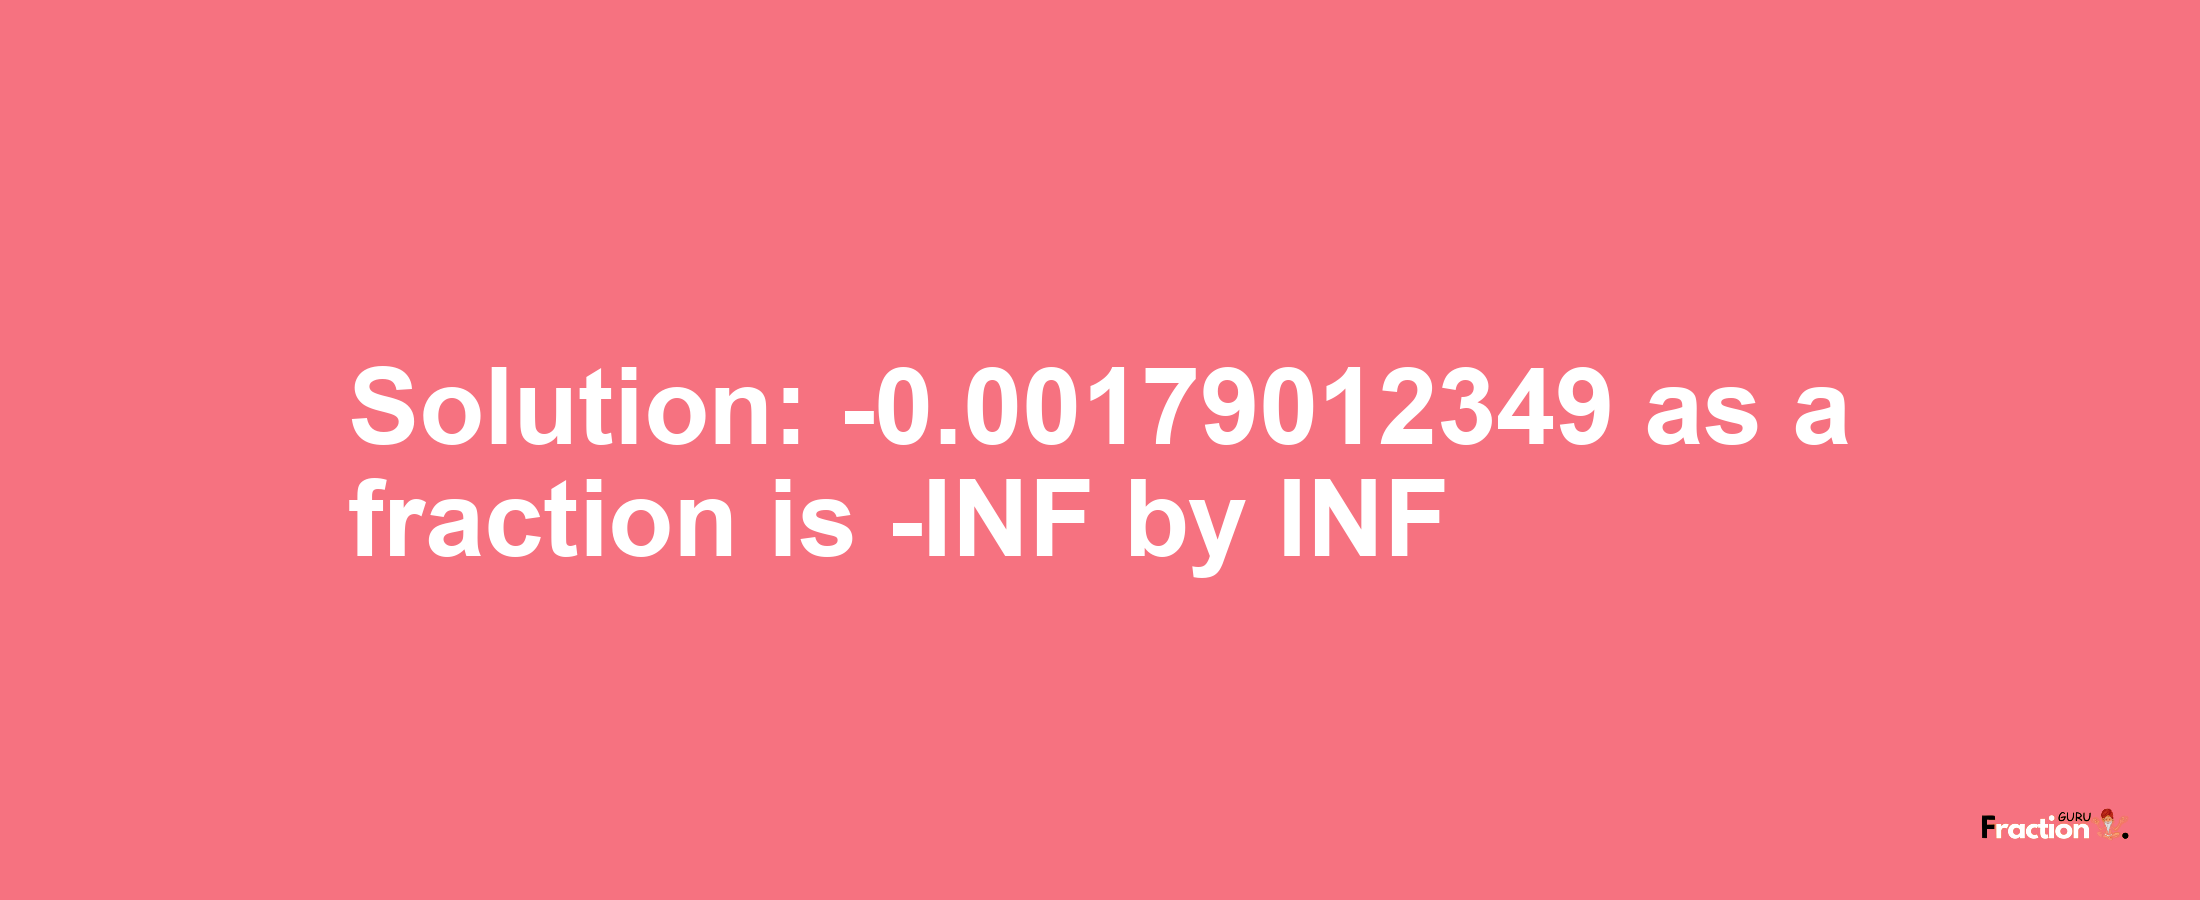 Solution:-0.00179012349 as a fraction is -INF/INF